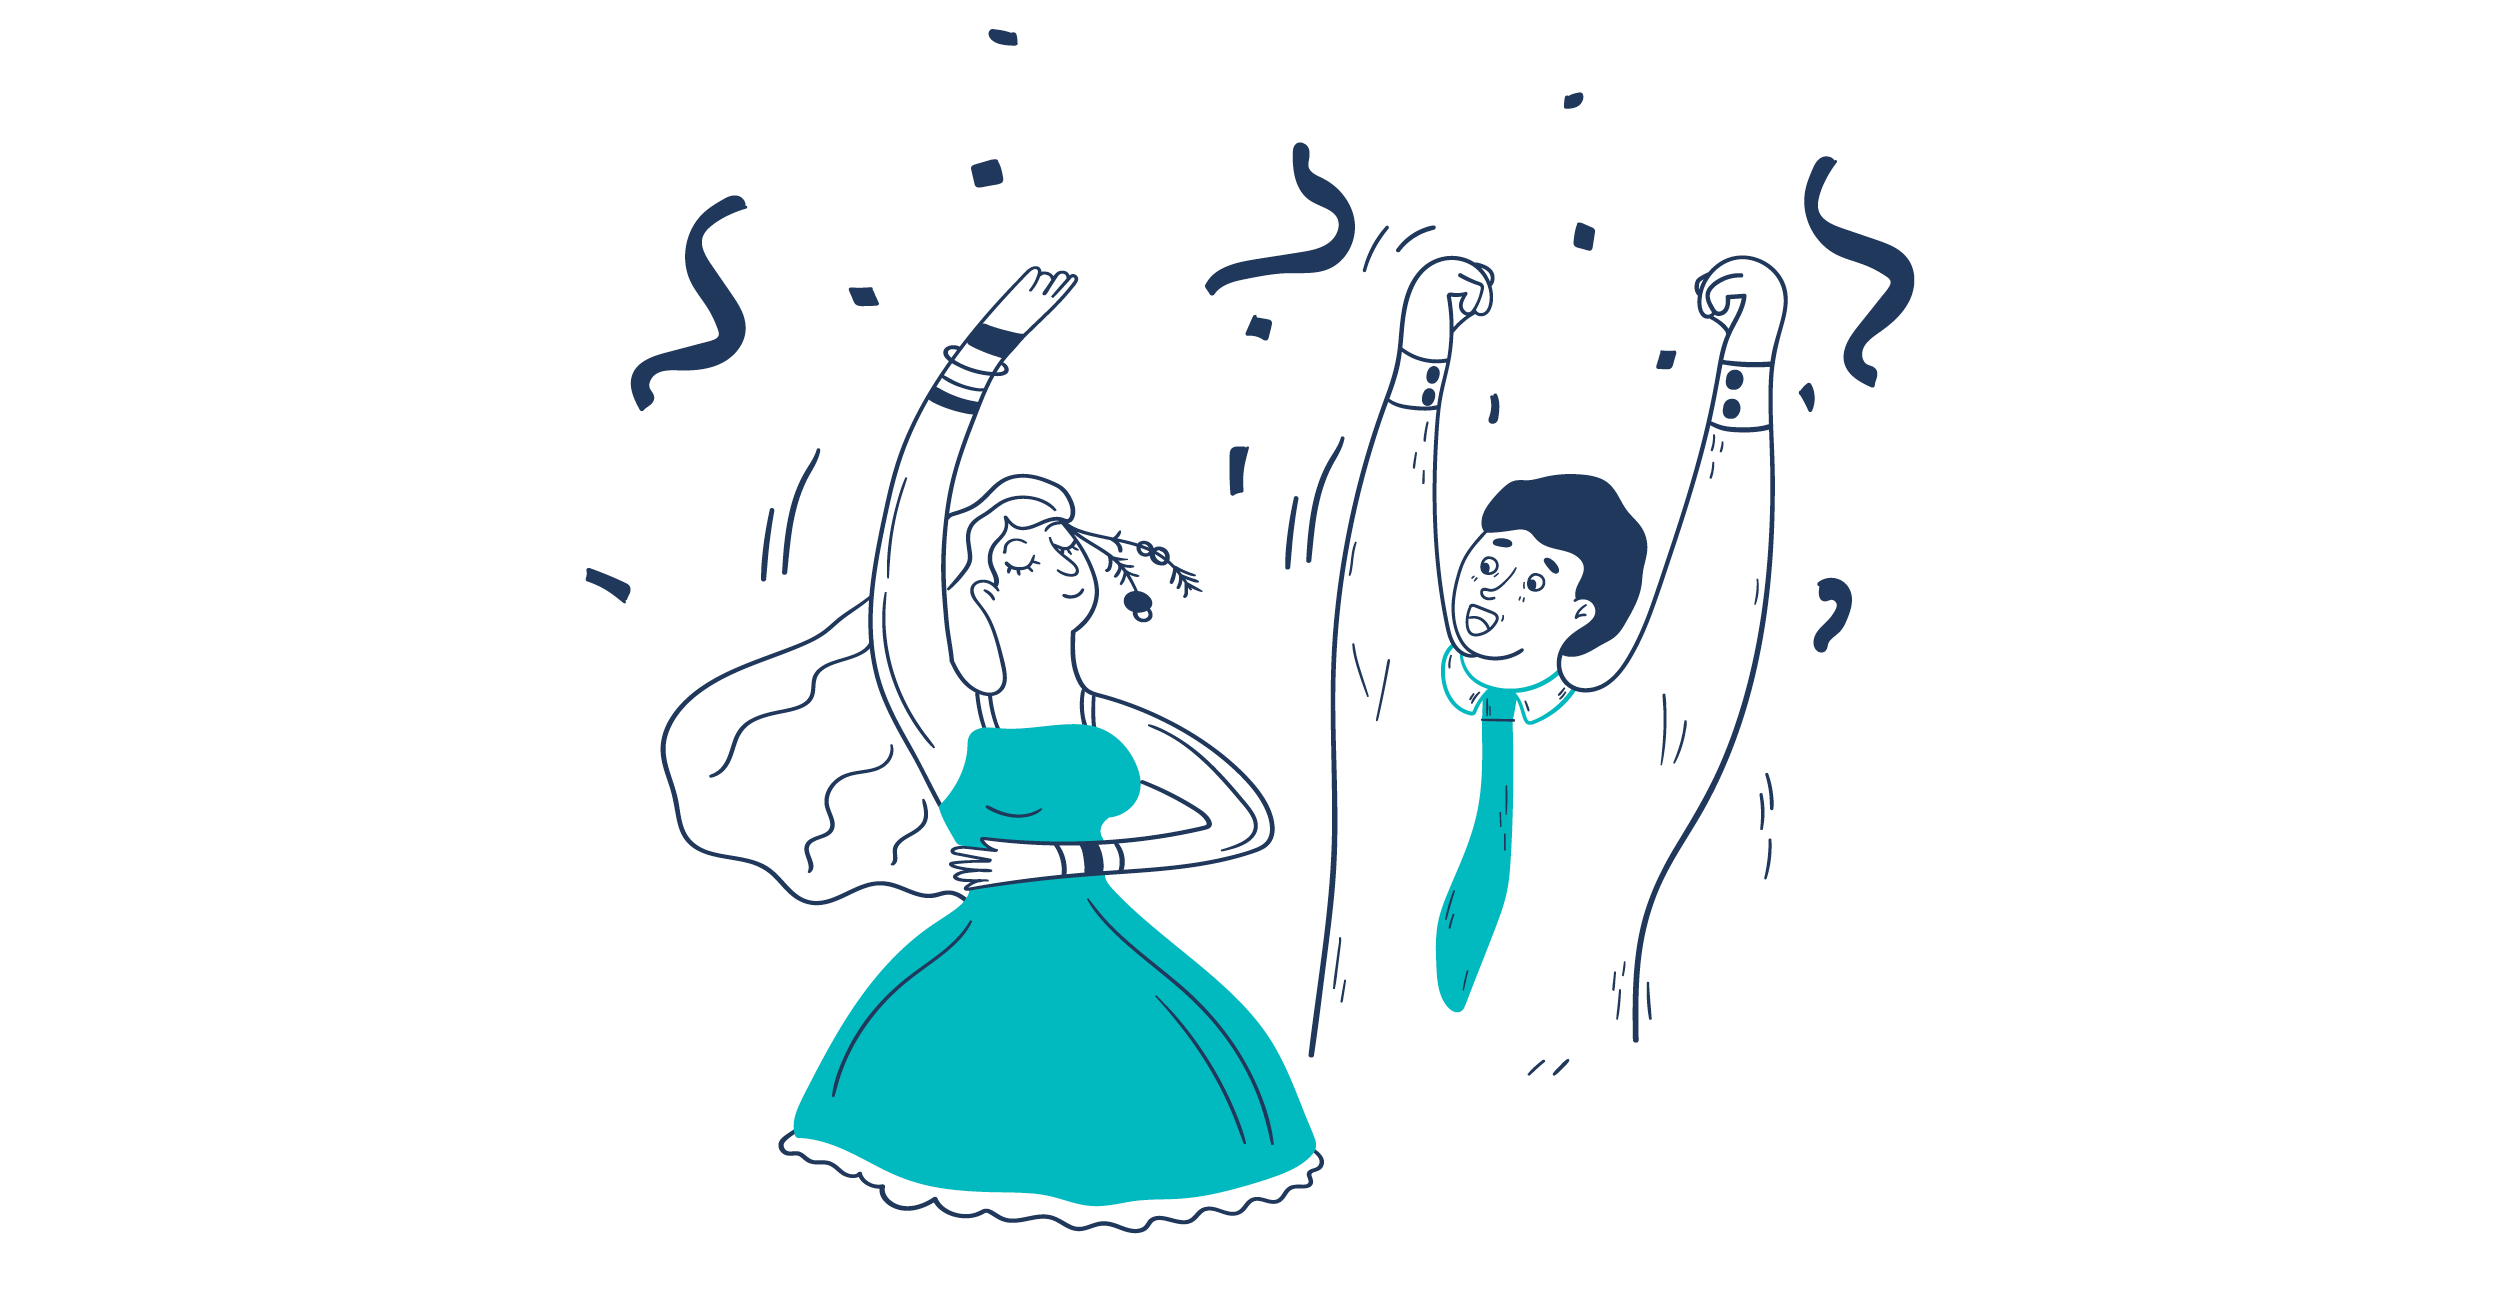 Illustration of a man and a woman with arms in the air dancing and smiling